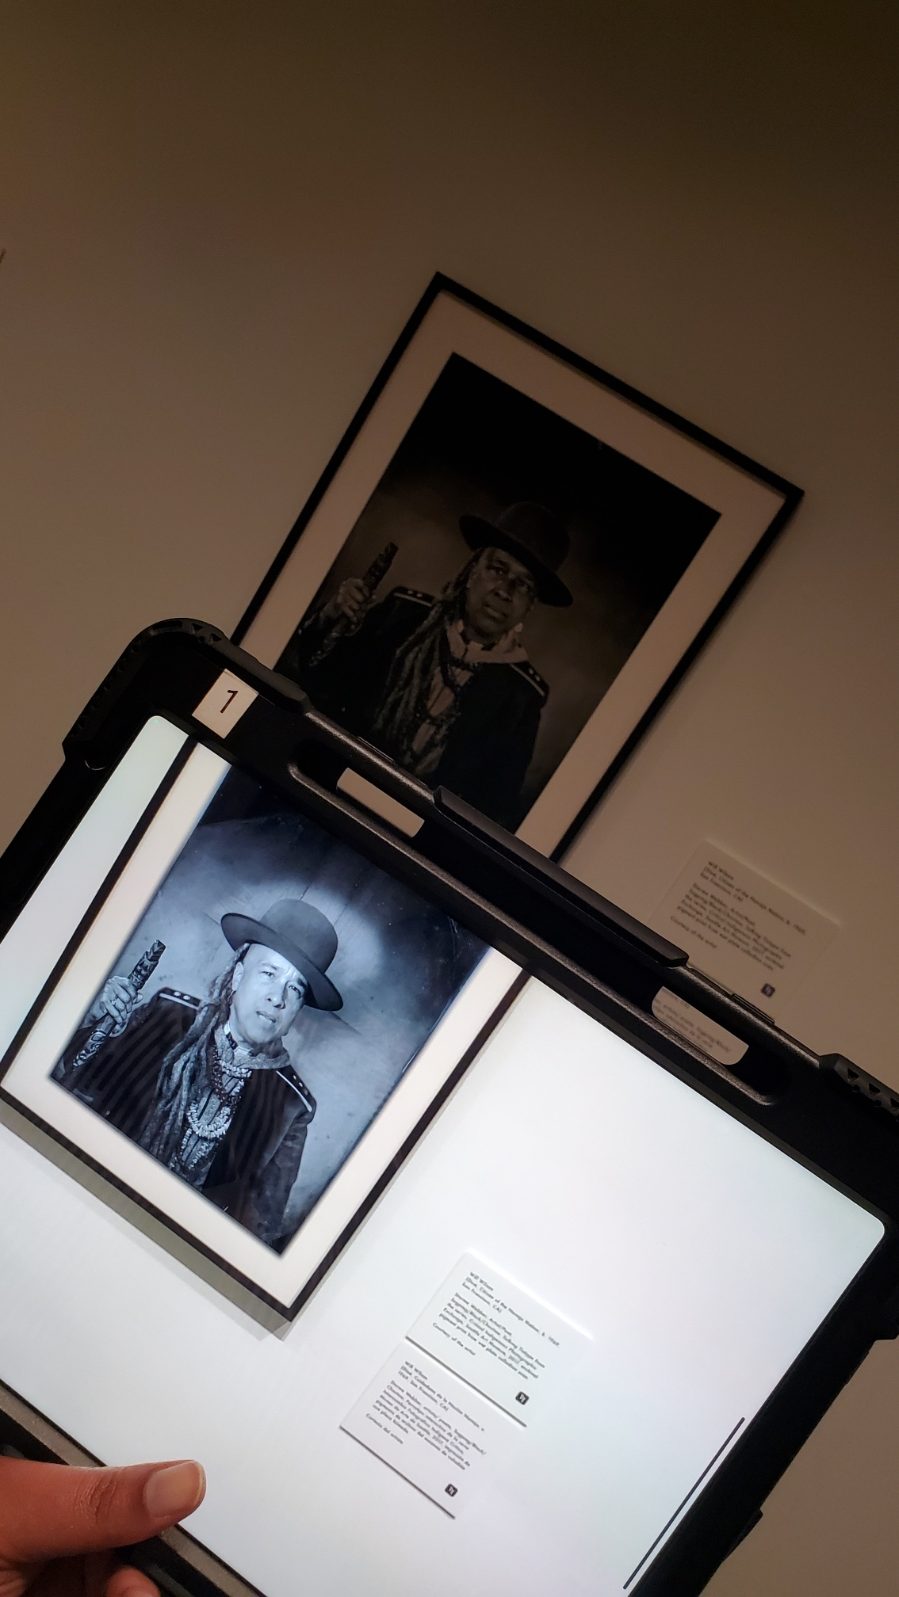 View of a hand holding a computer tablet showing a black-and-white photograph of an Indigenous American wearing a broad-brimmed hat; just beyond, a similar photographed, framed and hung on a gallery wall, is visible.